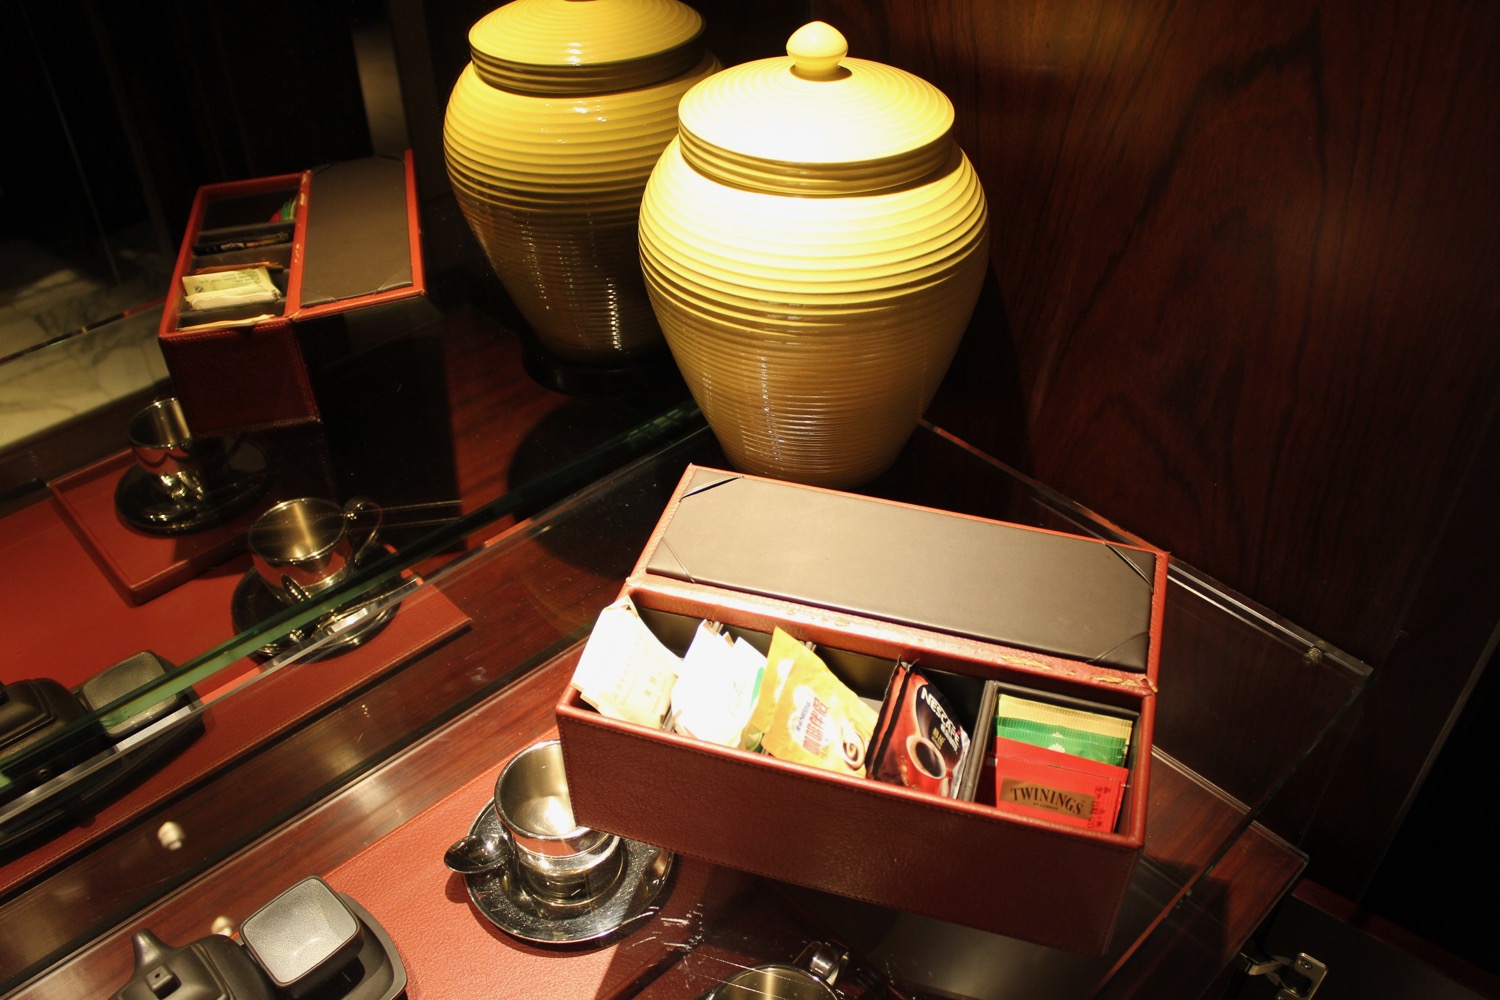 a box with tea packets and a couple of yellow ceramic jars